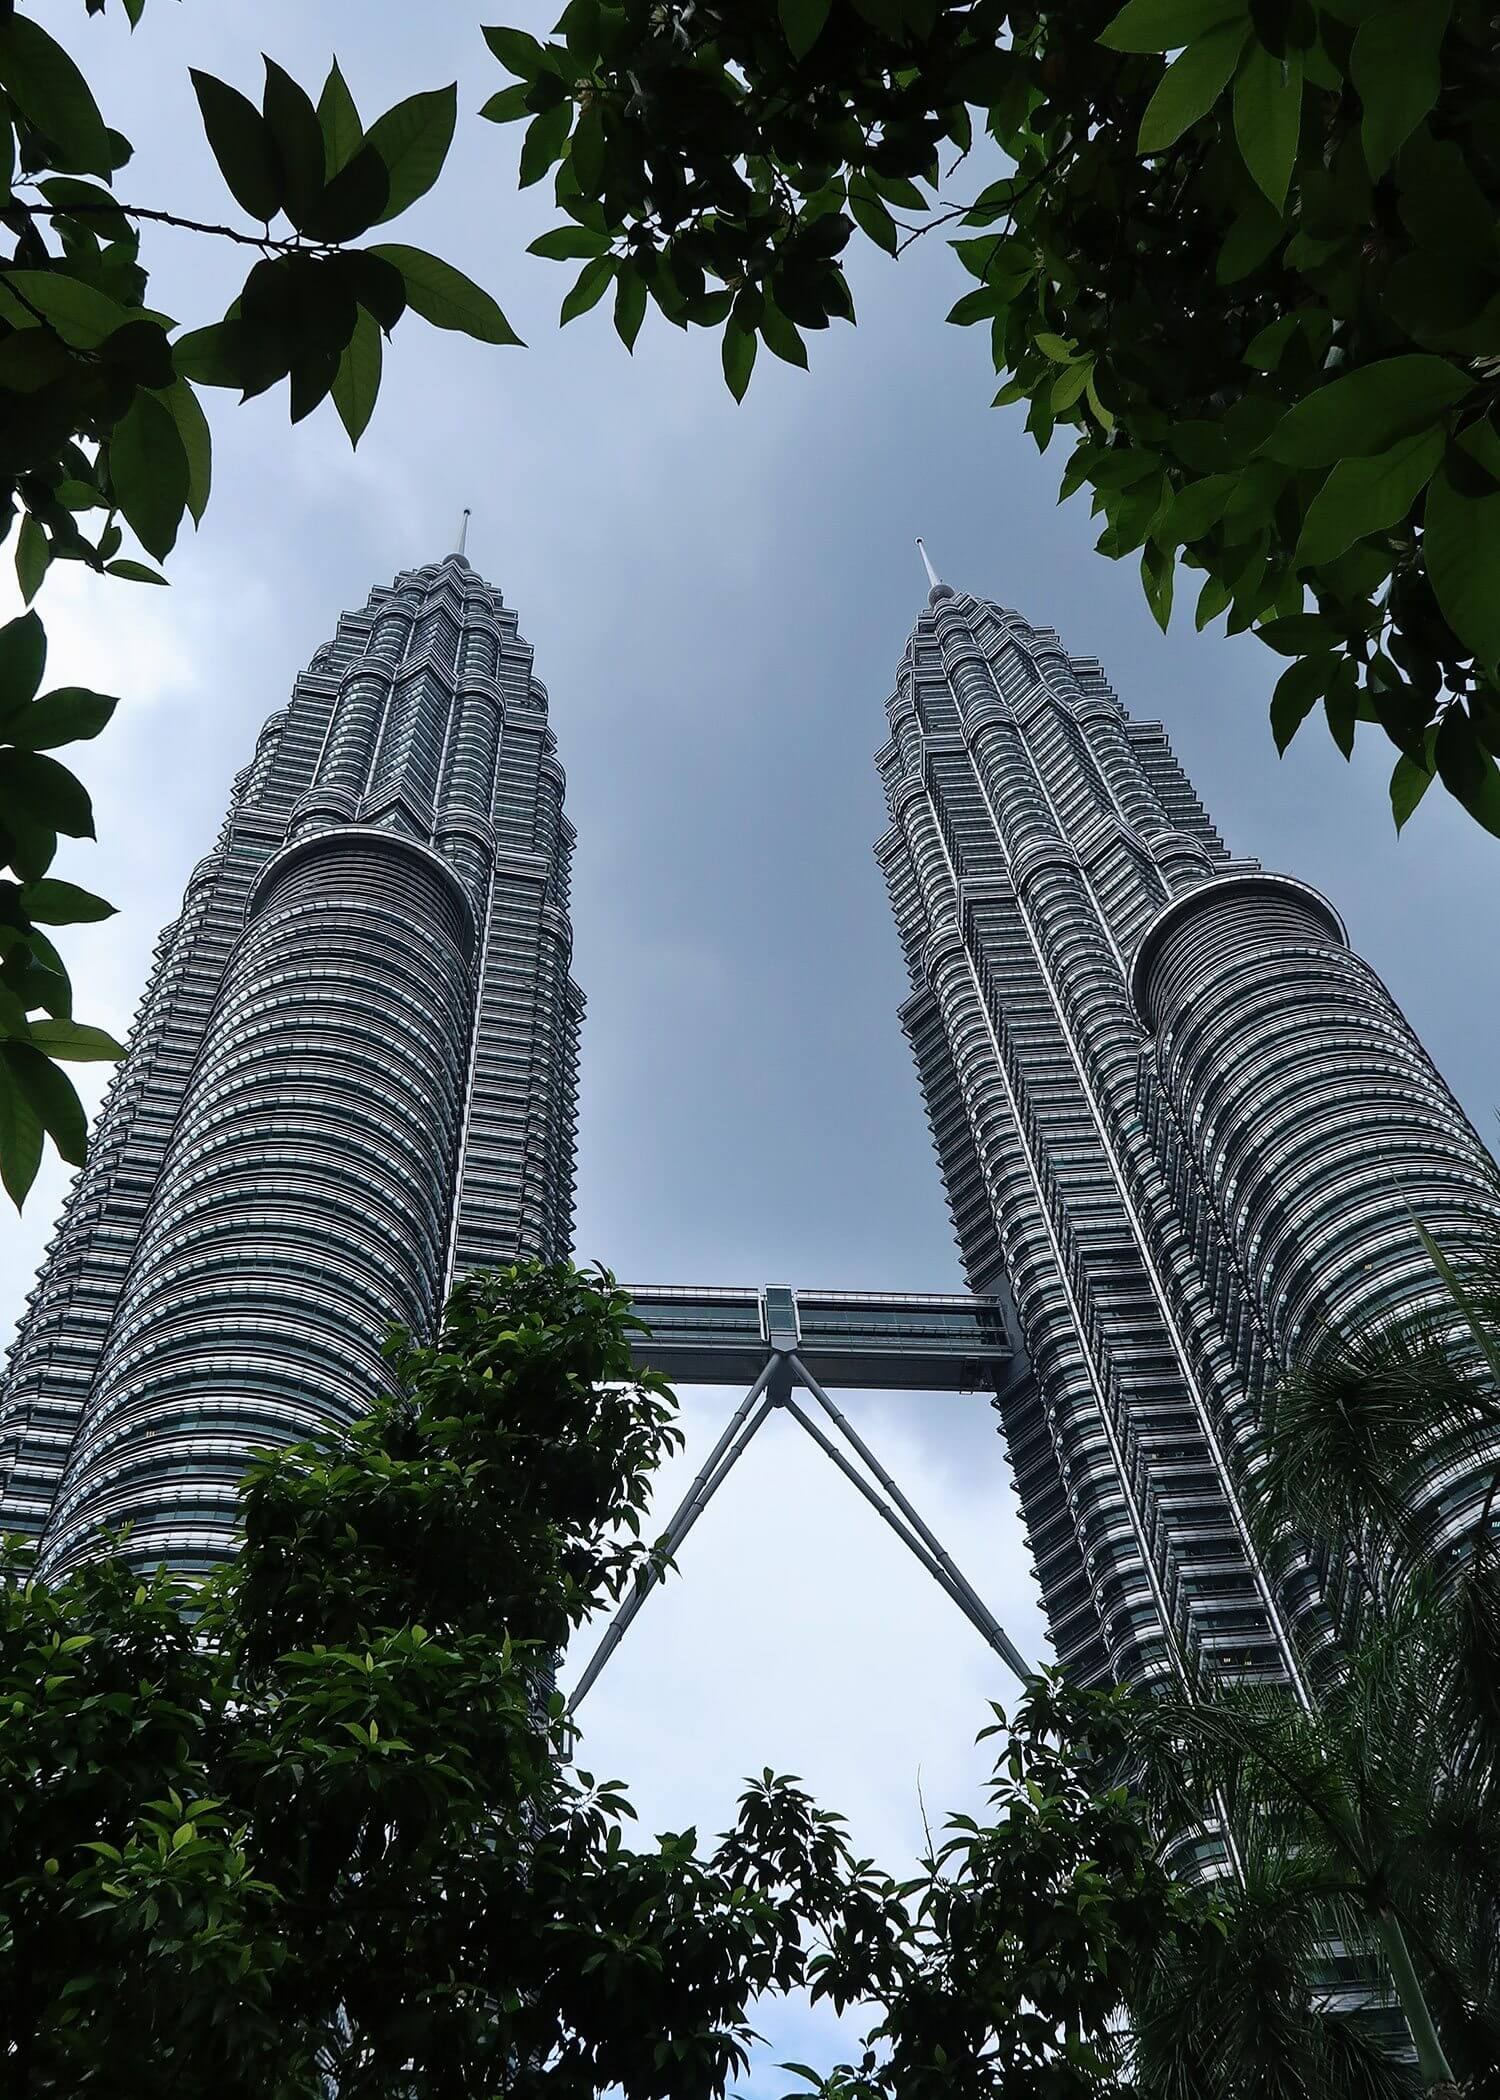 Petronas Towers from the bottom of the buildings